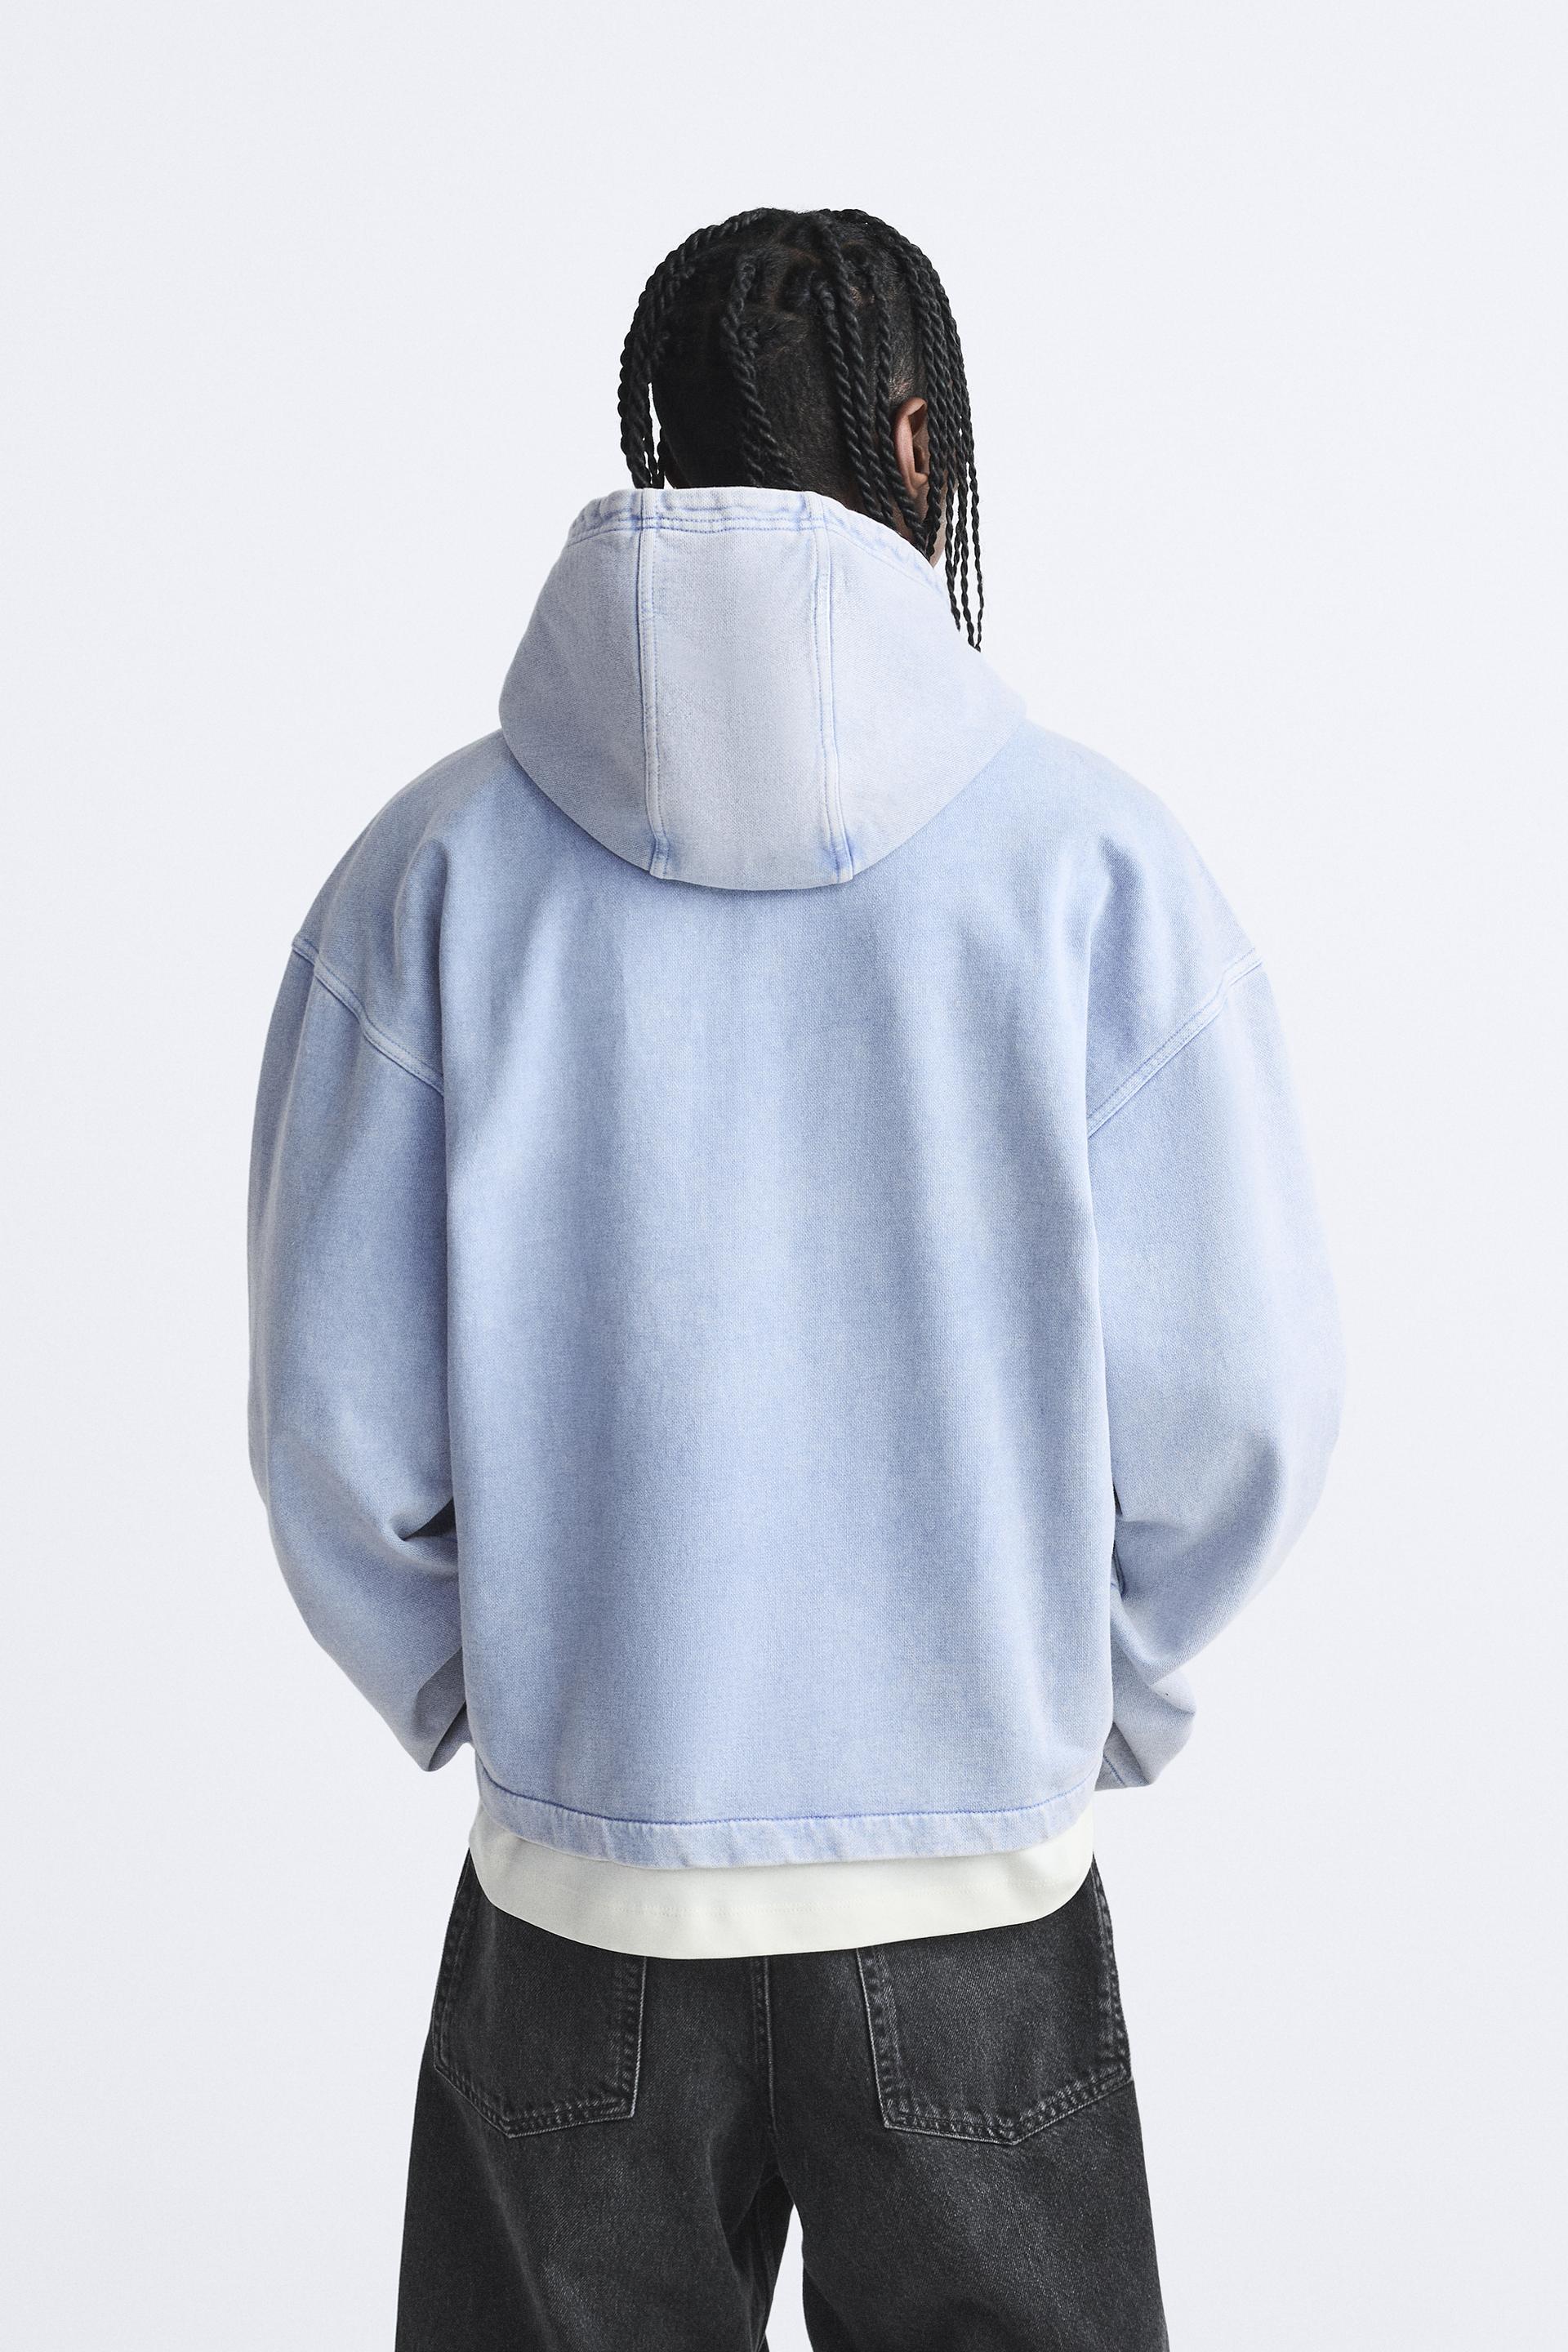 Zara, boxy cut hoodie jacket. In periwinkle blue satin, lined with